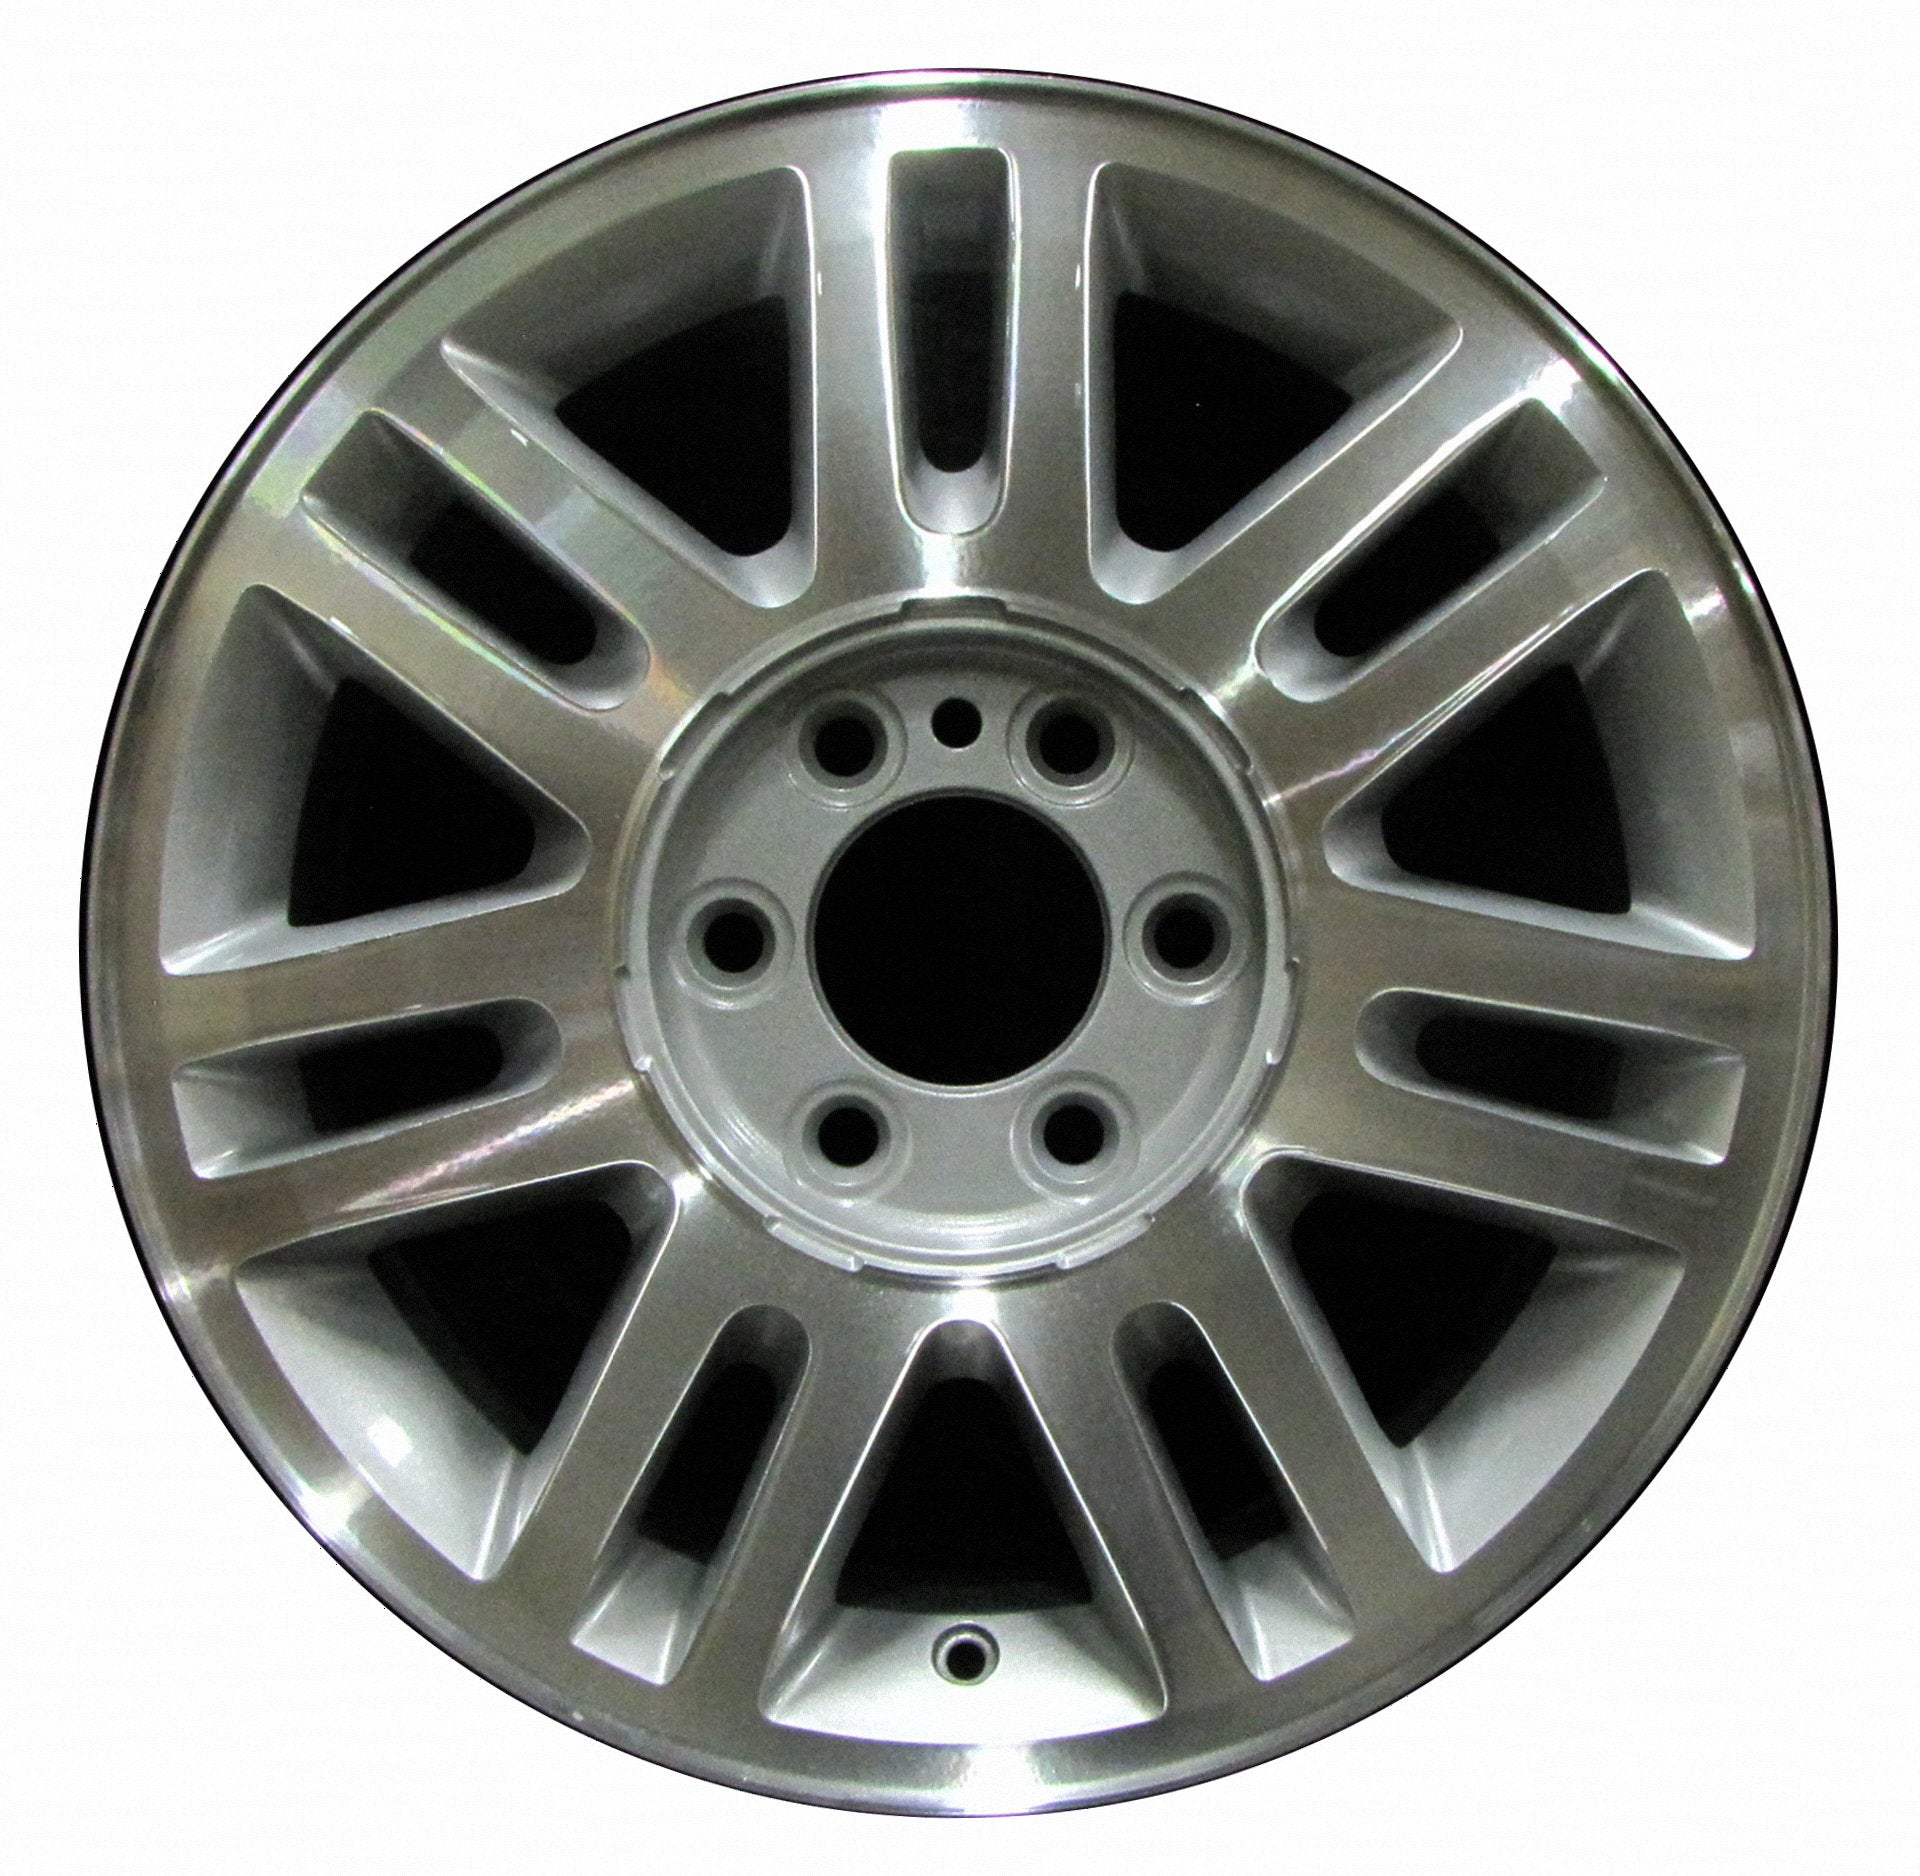 Ford F150 Truck  2009, 2010, 2011, 2012, 2013, 2014 Factory OEM Car Wheel Size 18x7.5 Alloy WAO.3784.PS13.MA